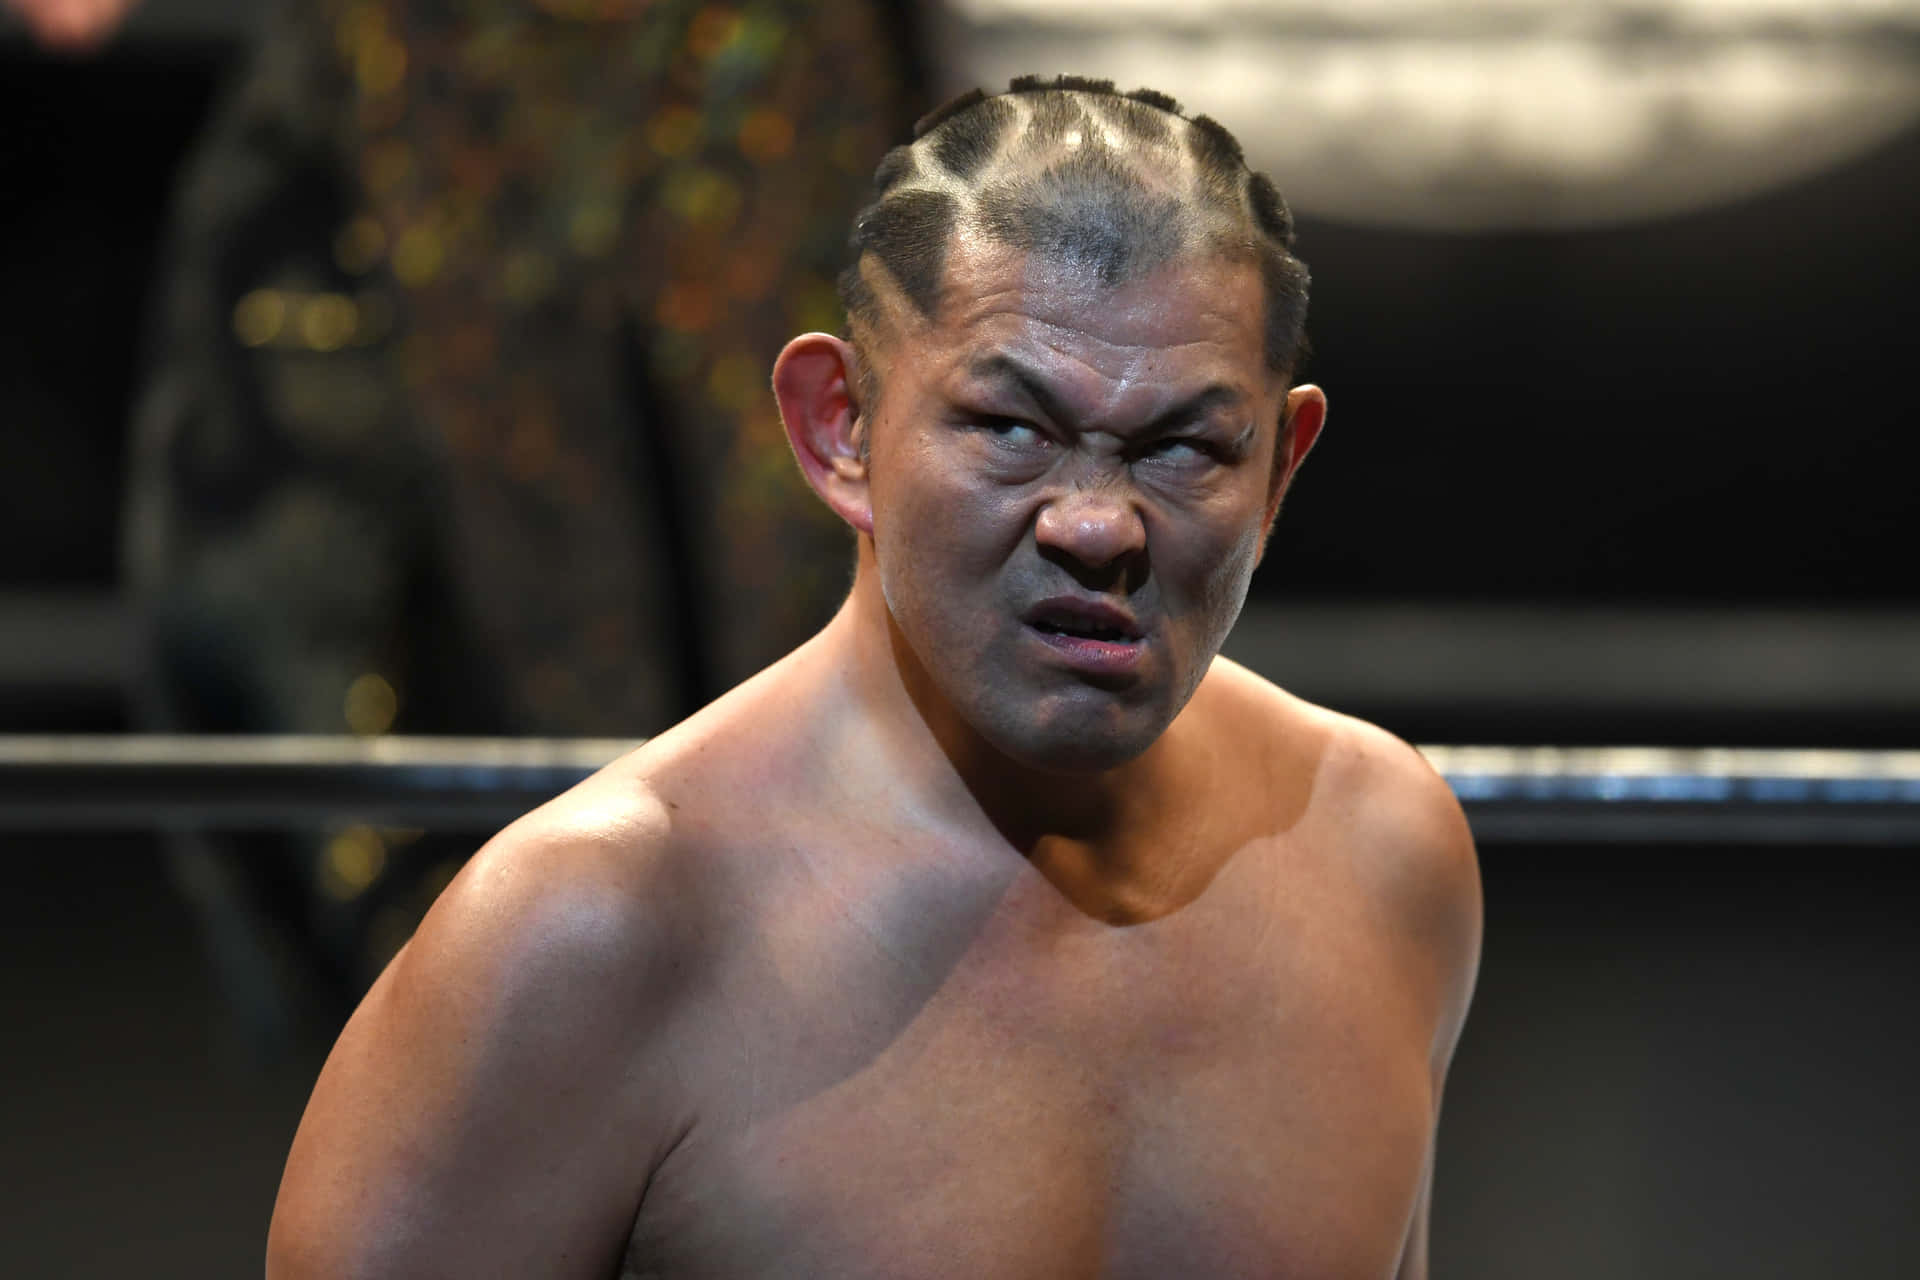 Minoru Suzuki showcasing his iconic angry expression in the ring Wallpaper